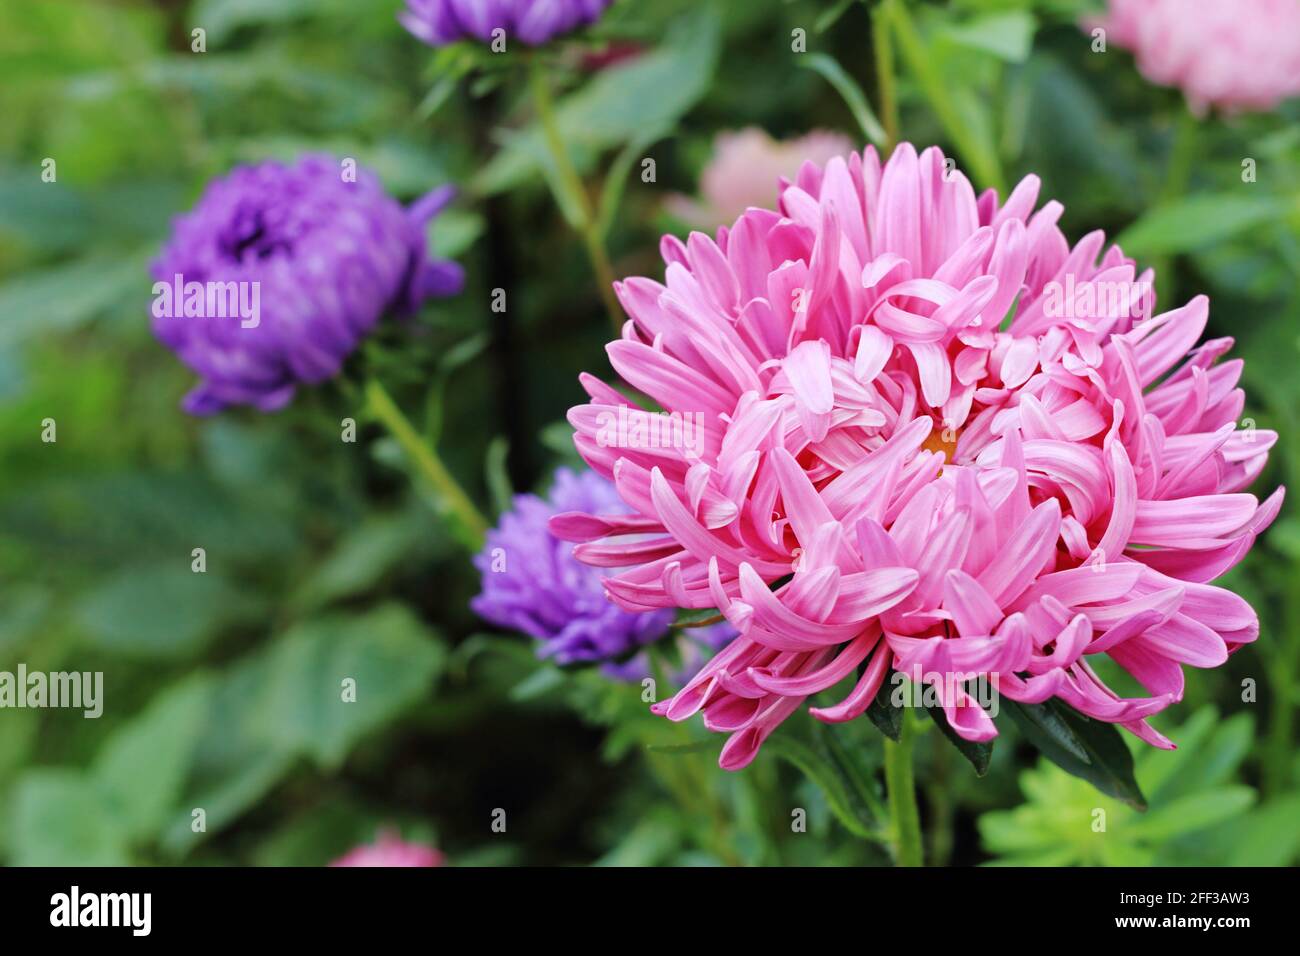 Big pink flower of China aster in the ornamental garden Stock Photo